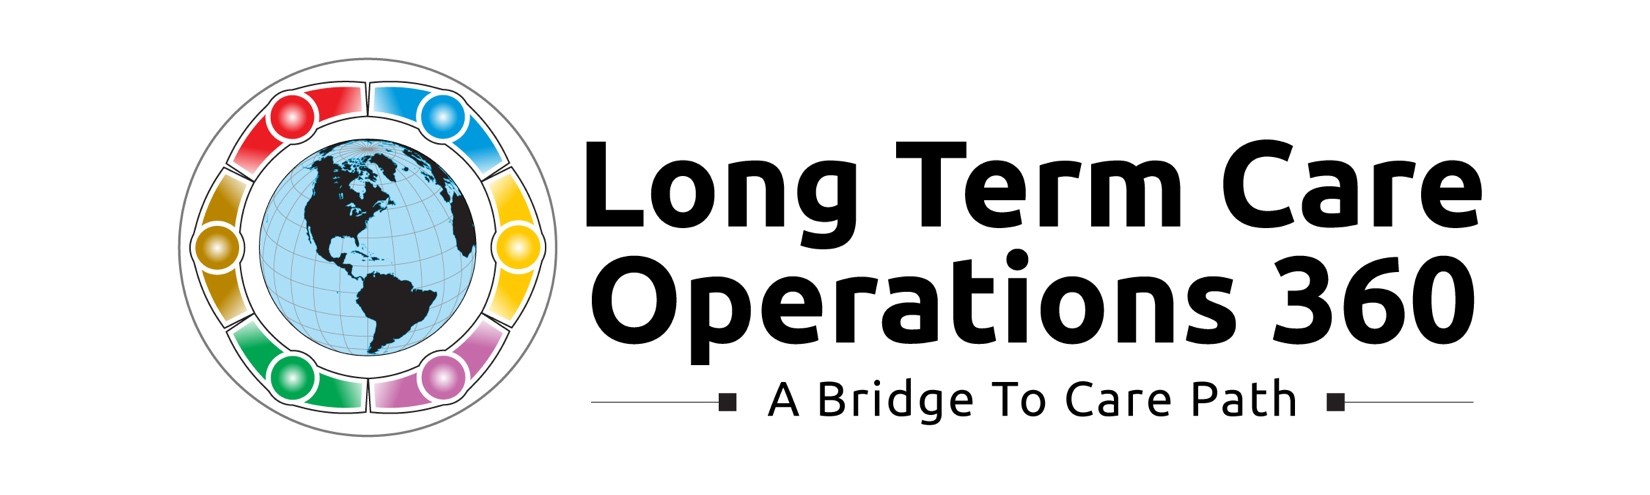 Long Term Care Operations 360